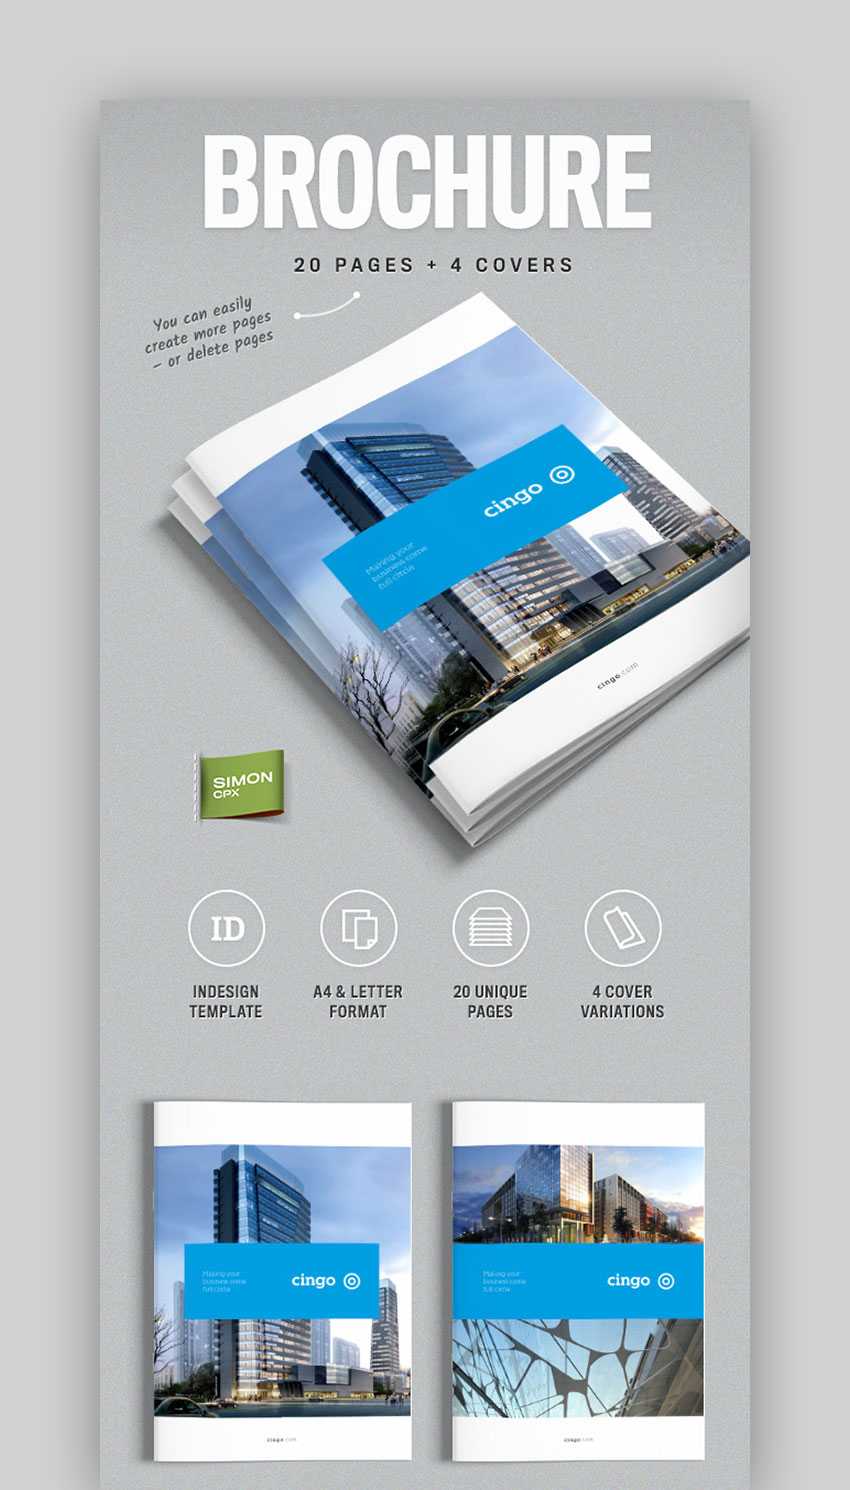 30 Best Indesign Brochure Templates – Creative Business Throughout Good Brochure Templates